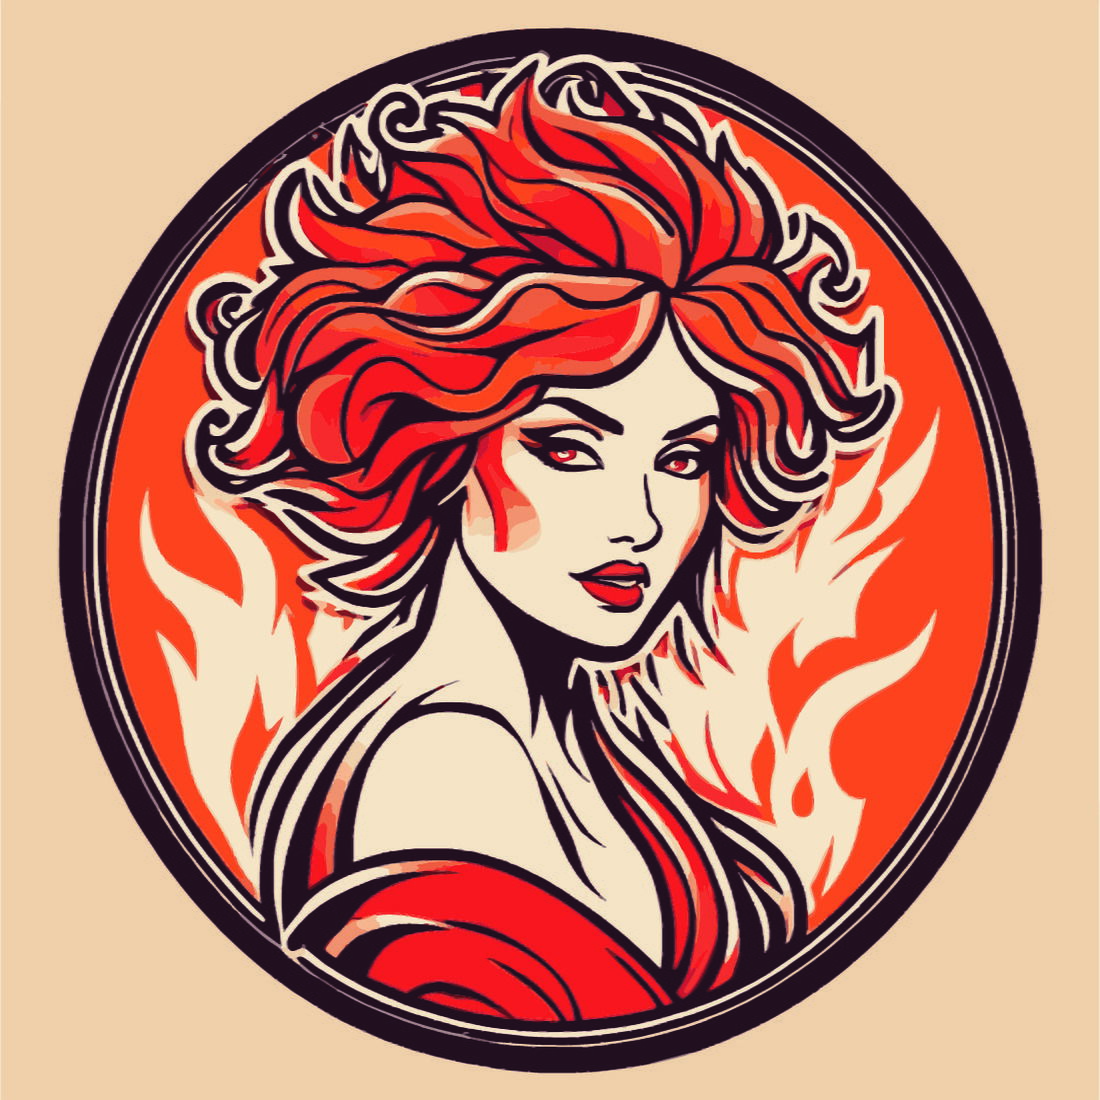 Fiery Woman illustration 4 Logos Deal preview image.